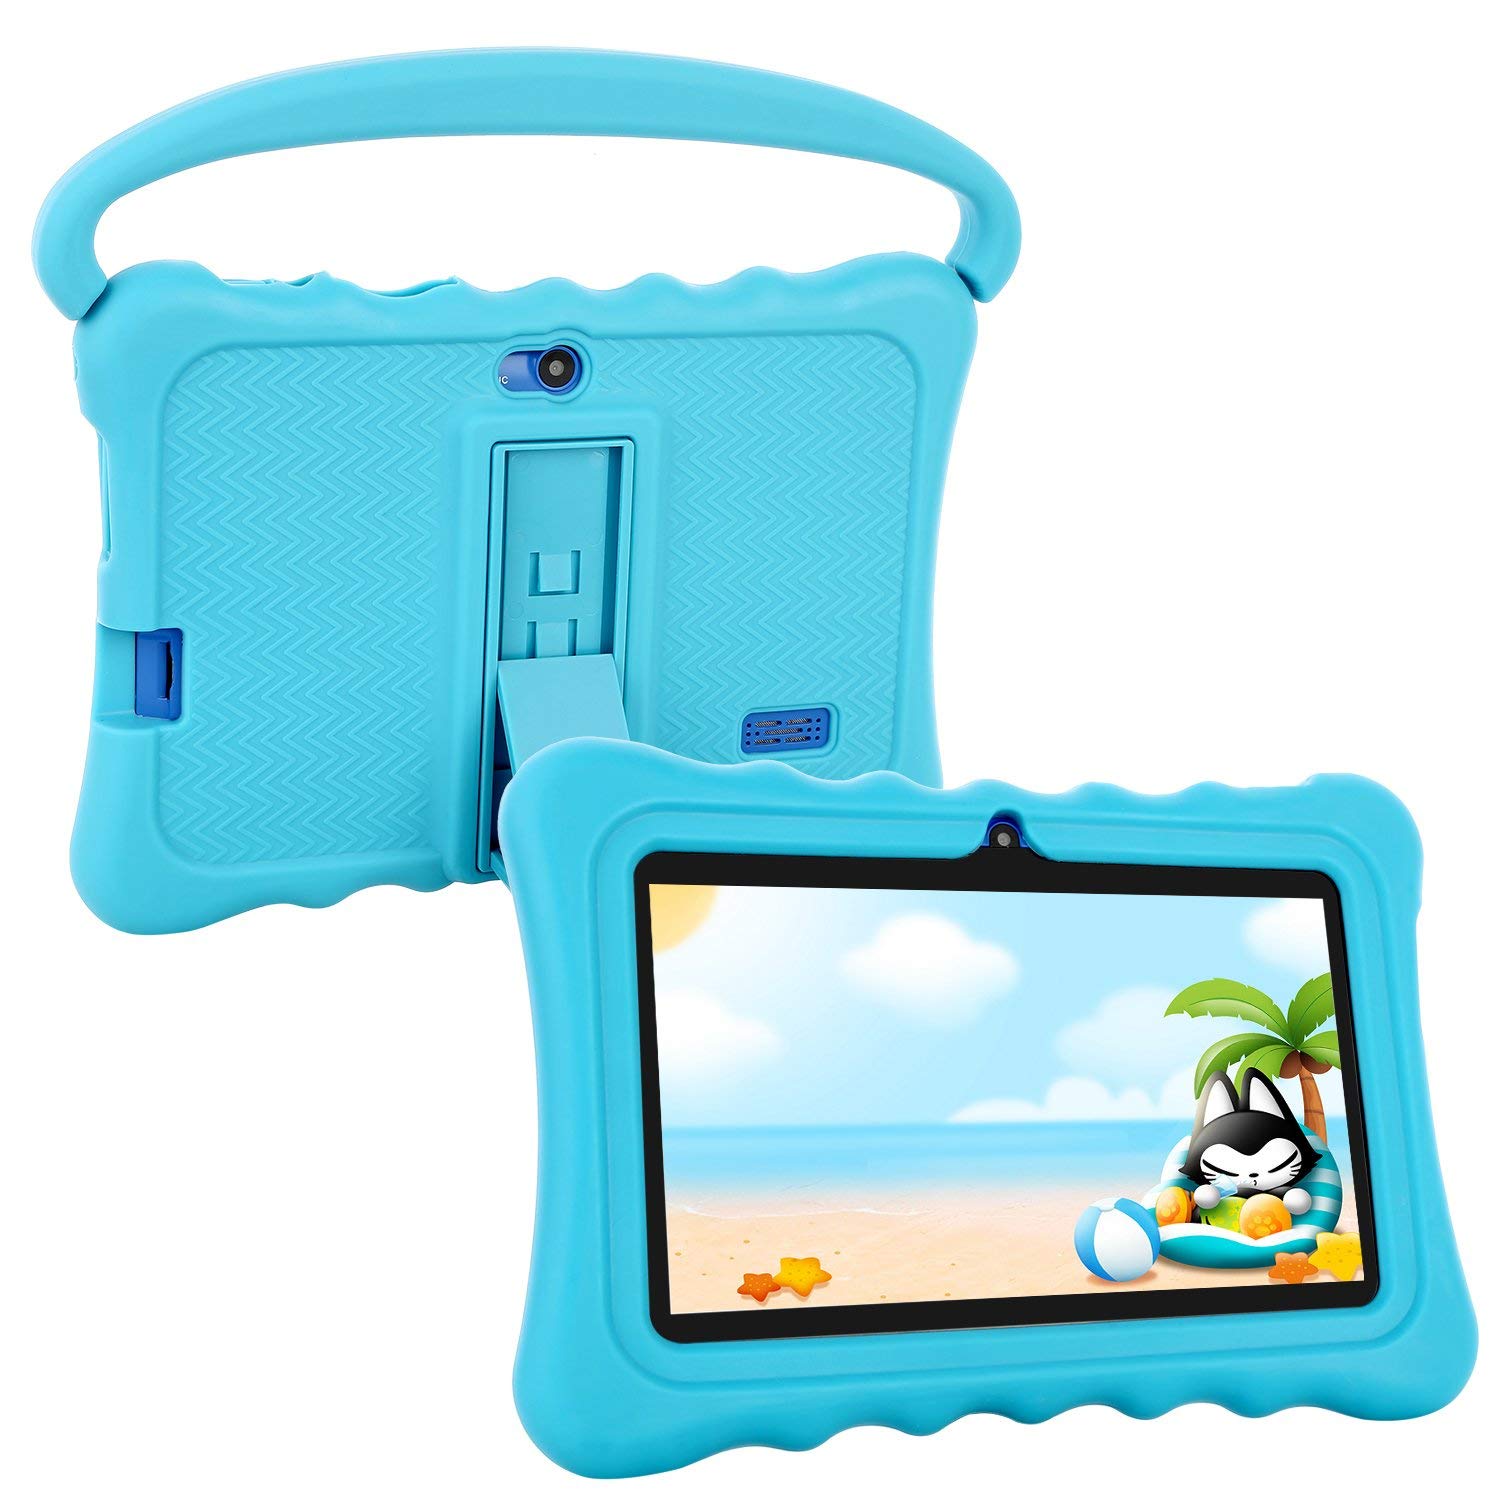 Auto Beyond Kids Tablet 7-inch Android Tablet - Best Reviews Tablet